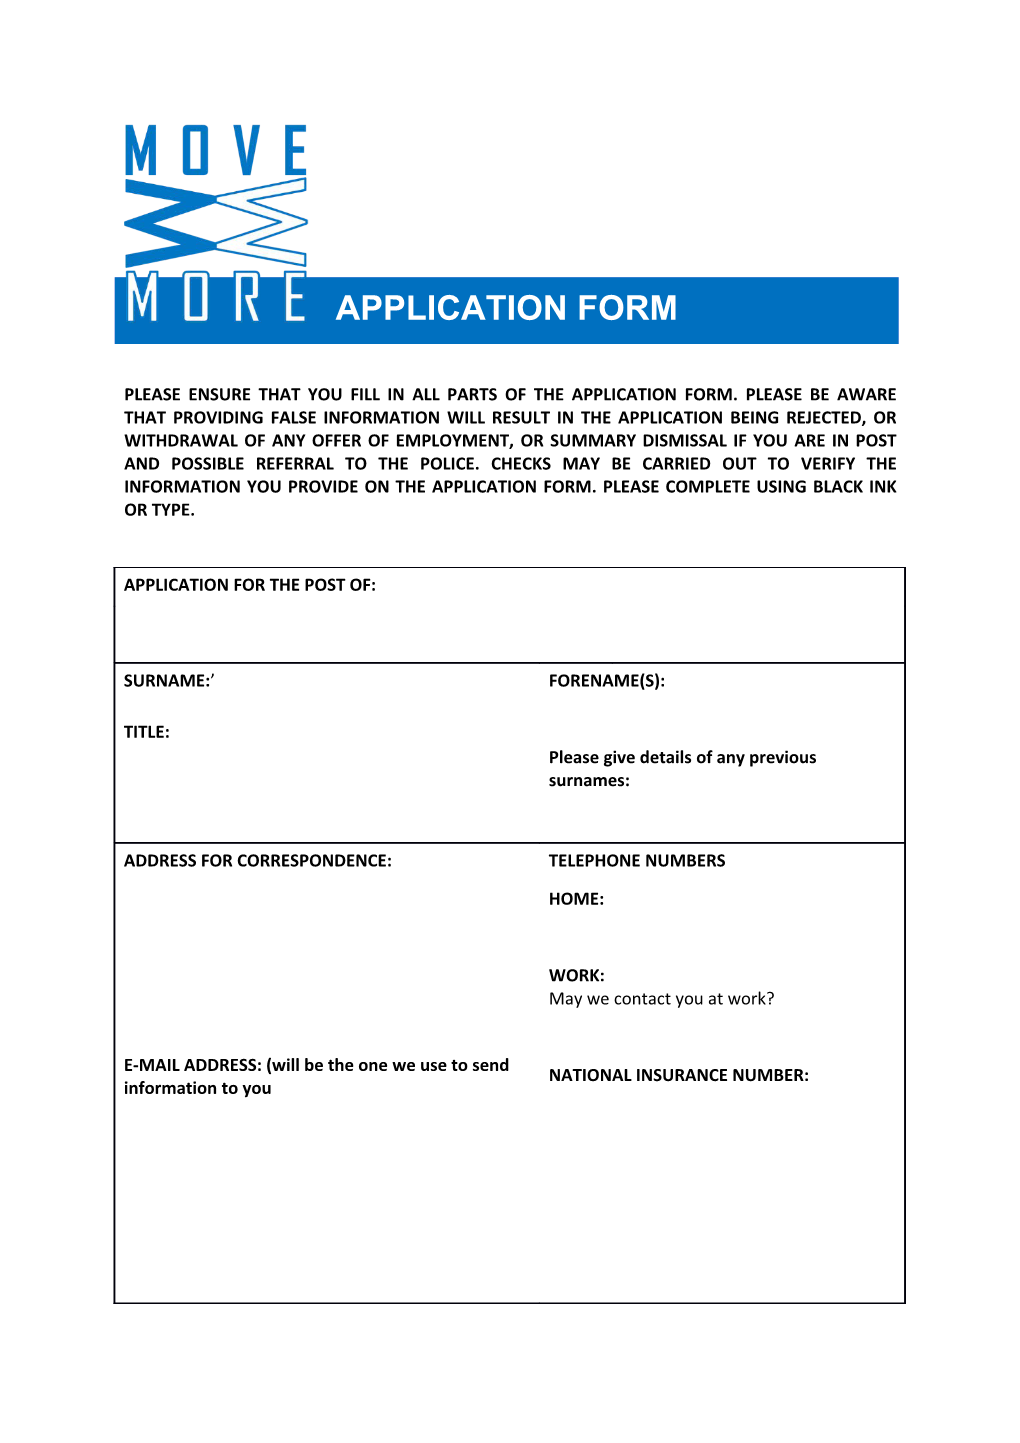 Please Ensure That You Fill in All Parts of the Application Form. Please Be Aware That